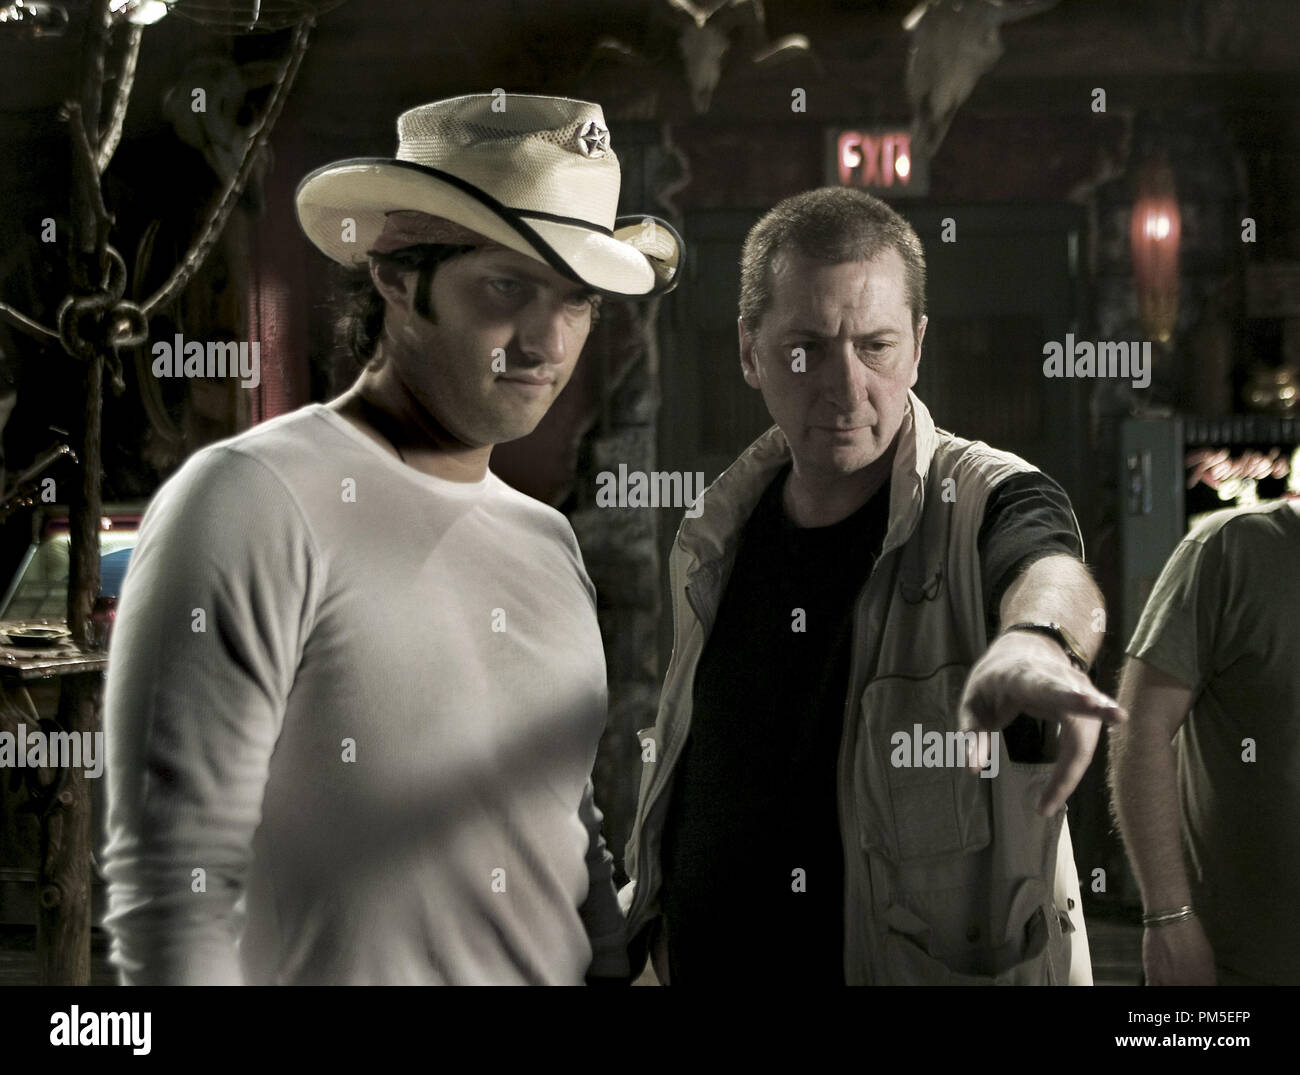 Film Still / Publicity Still from 'Sin City' Director Robert Rodriguez, writer Frank Miller © 2005 Dimension Films Photo Credit: Rico Torres File Reference # 30736971THA  For Editorial Use Only -  All Rights Reserved Stock Photo